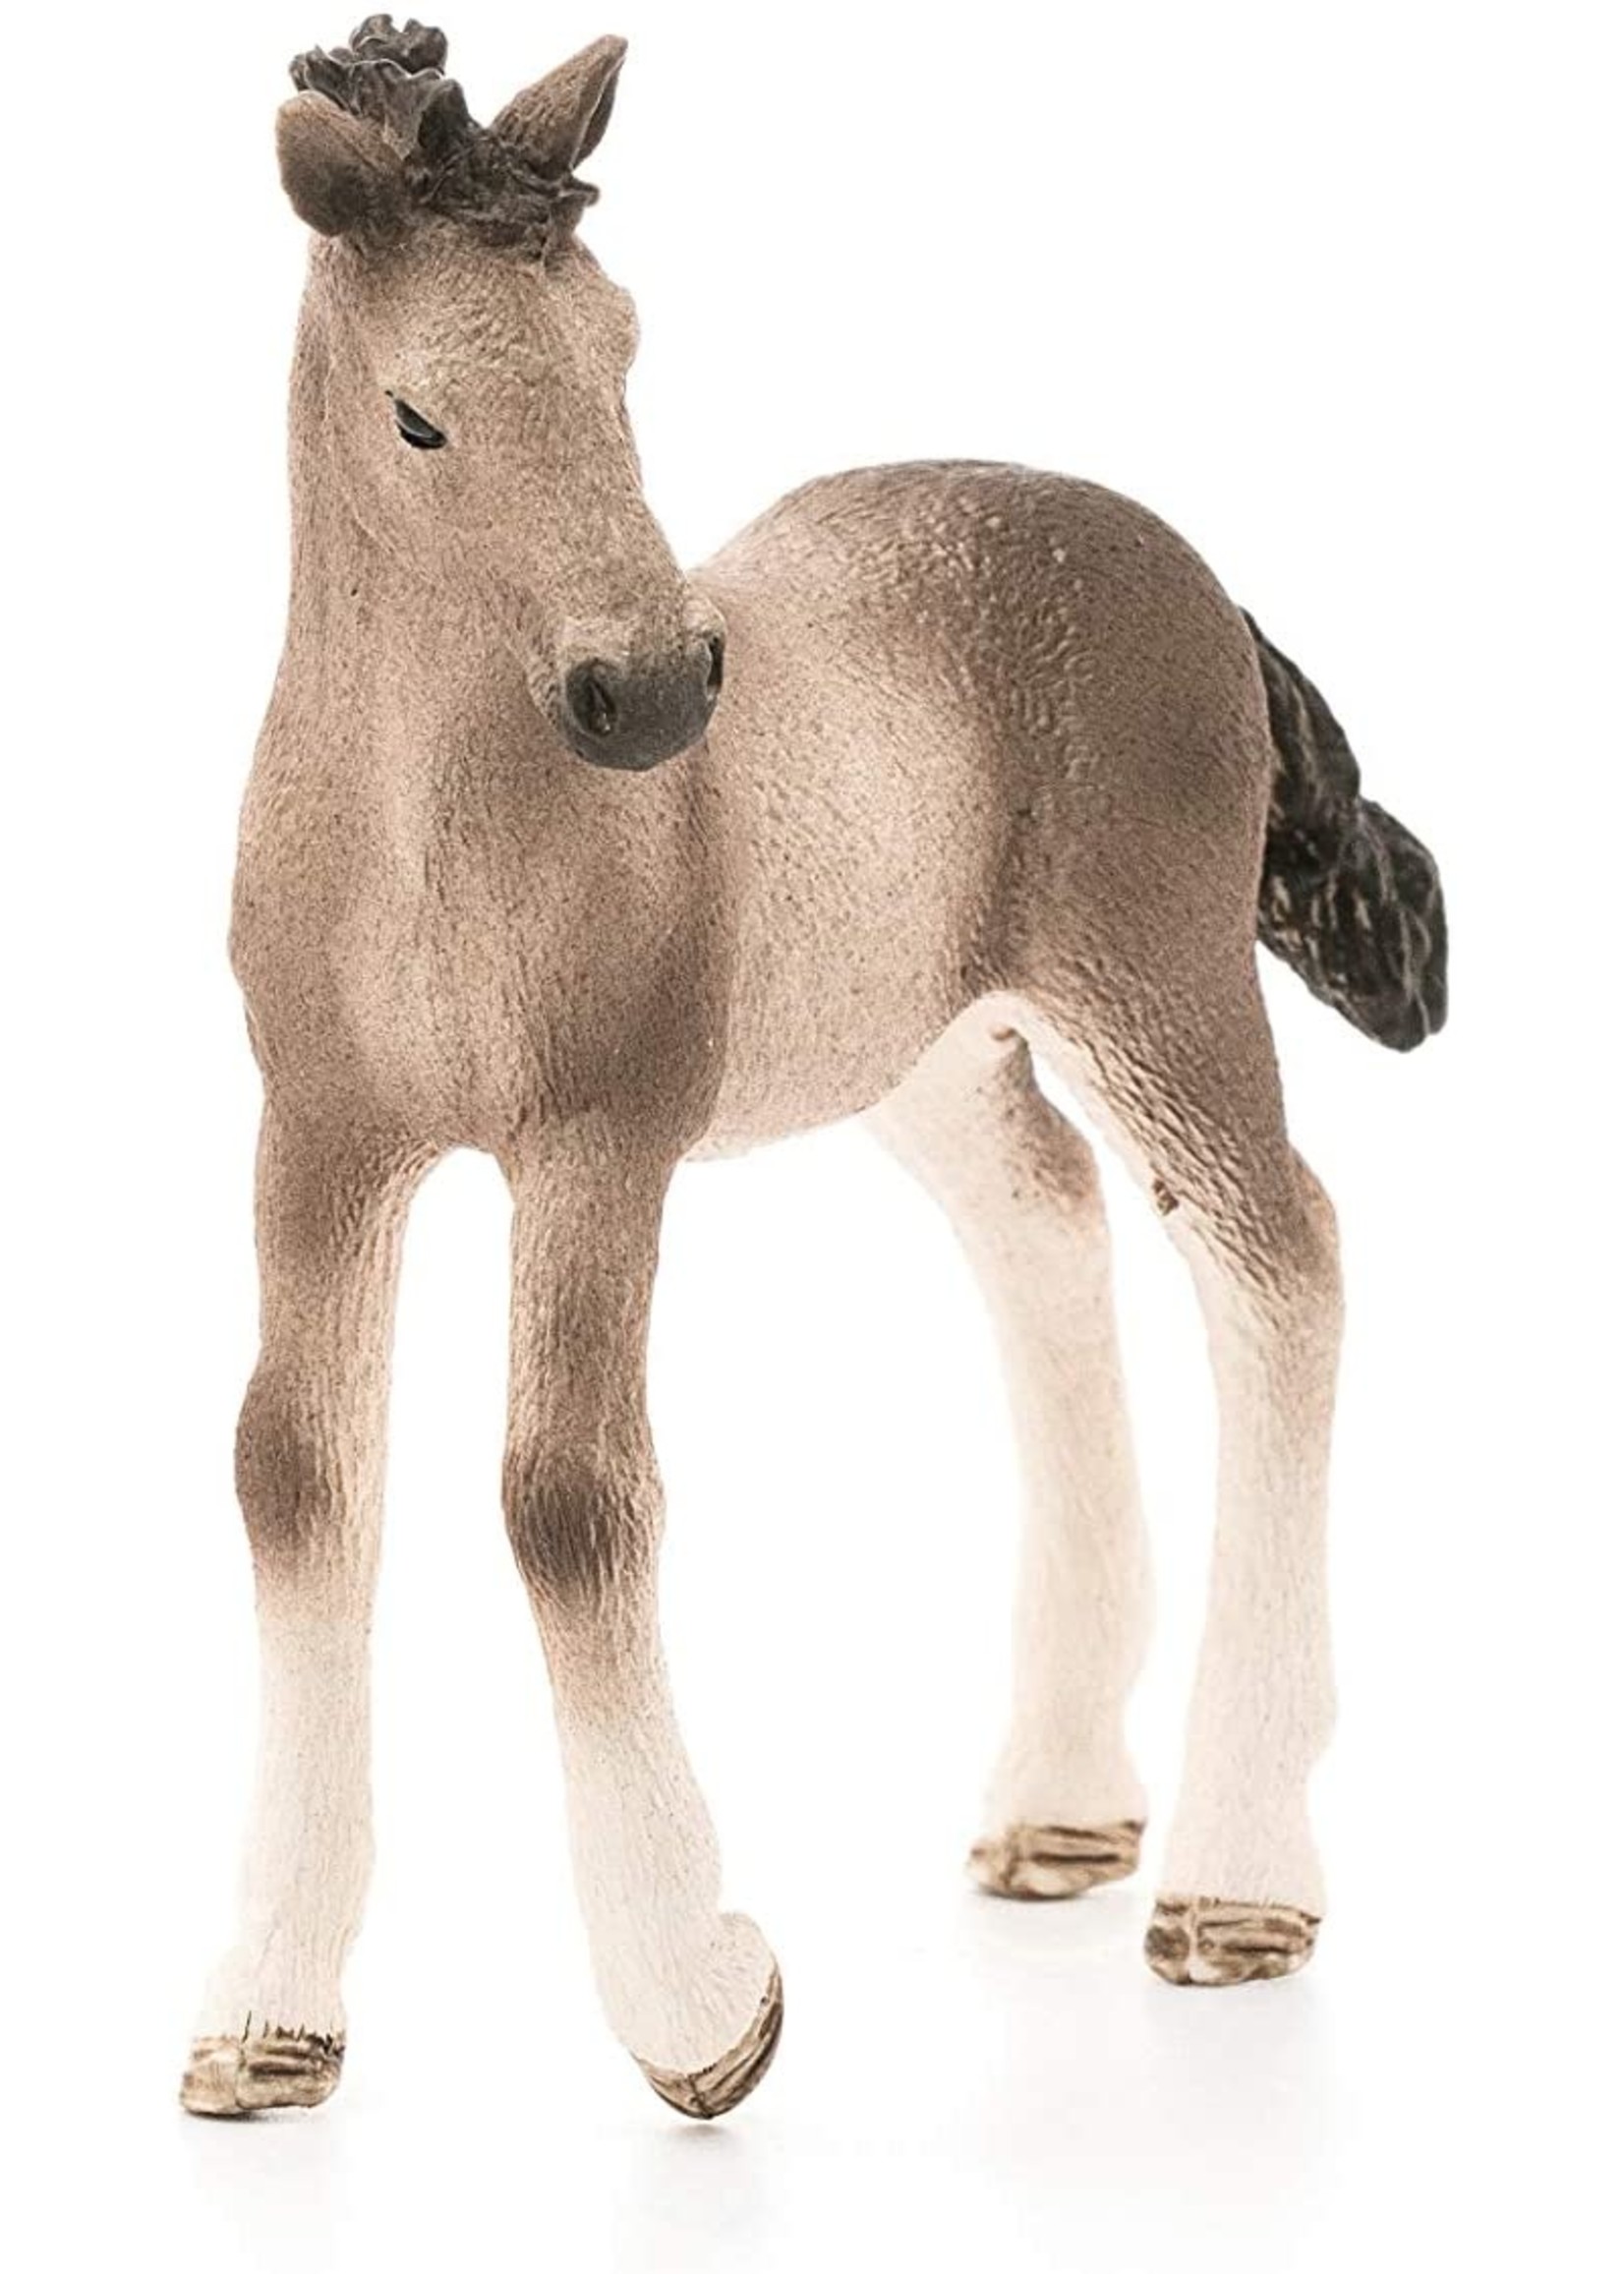 Schleich 13822 - Andalusian Foal